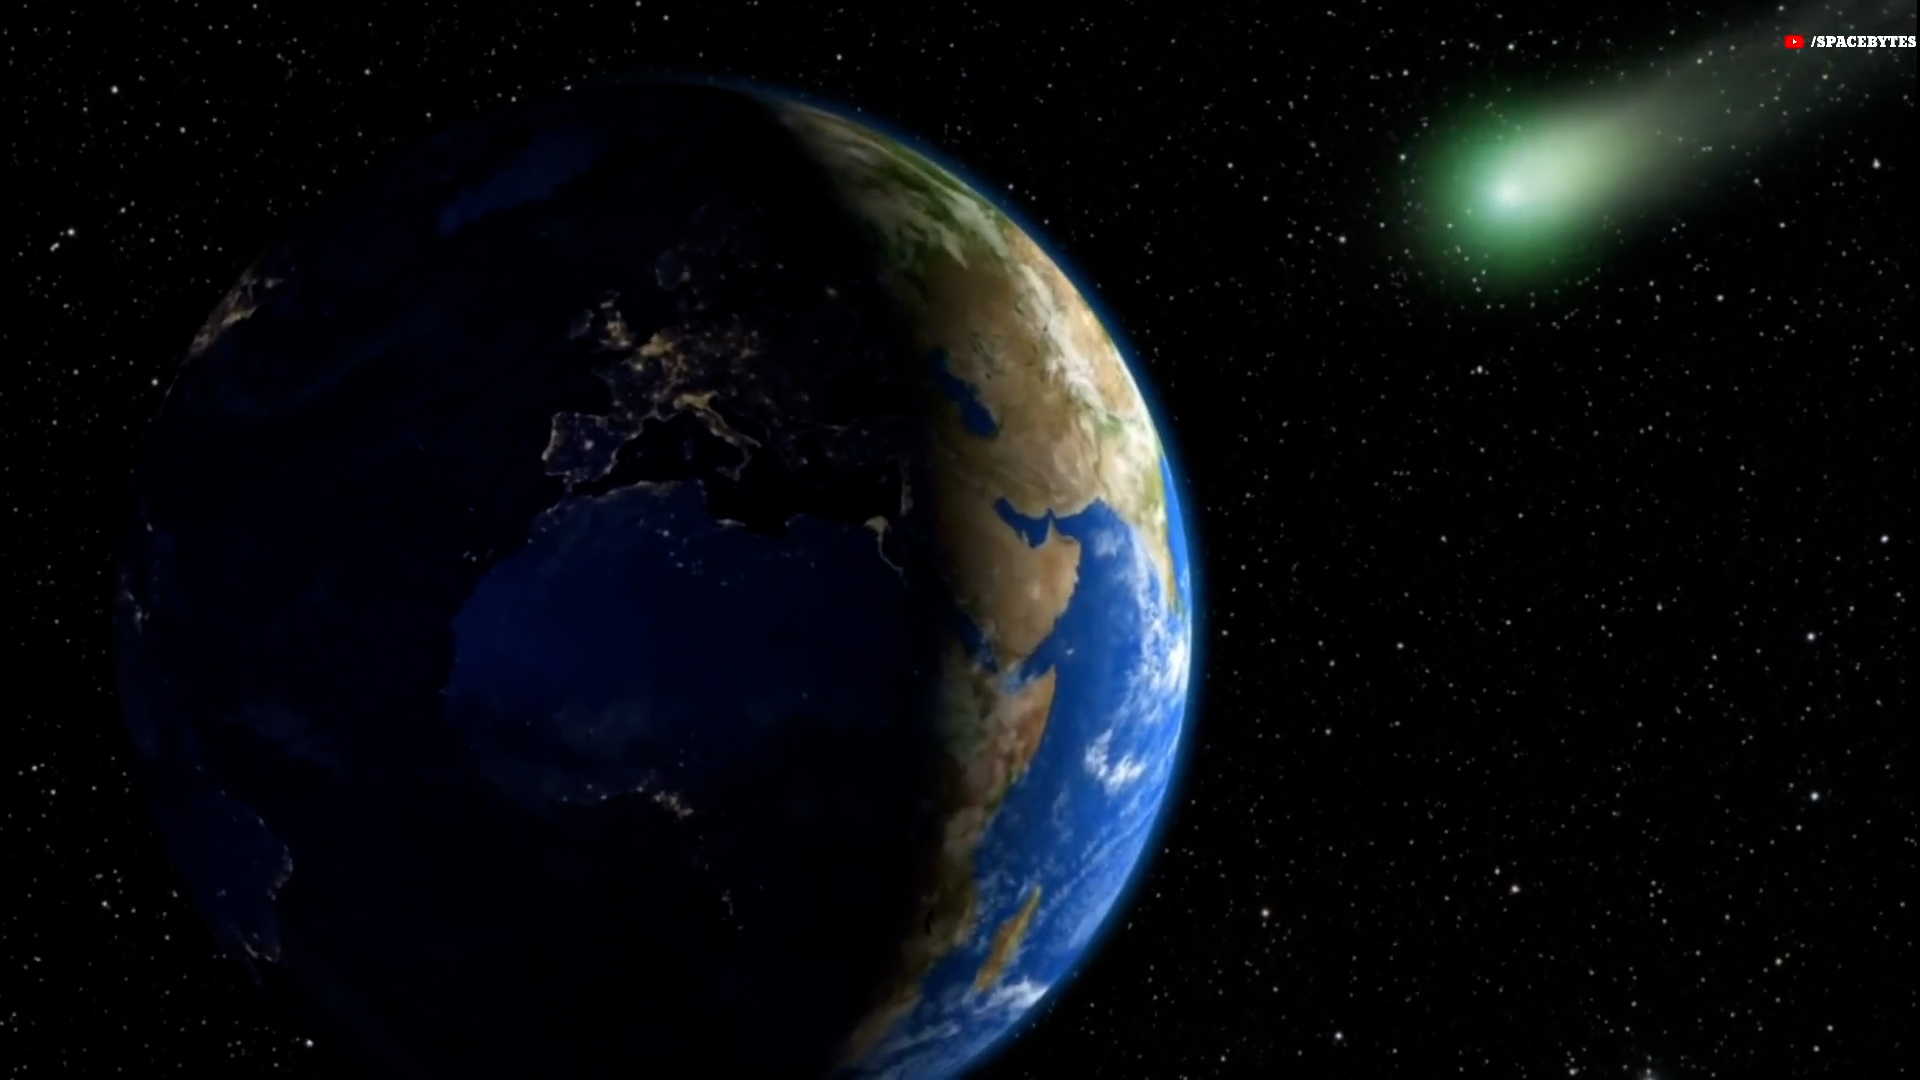 The 'DEVIL' comet, three times bigger than Mt. Everest, is heading toward Earth.